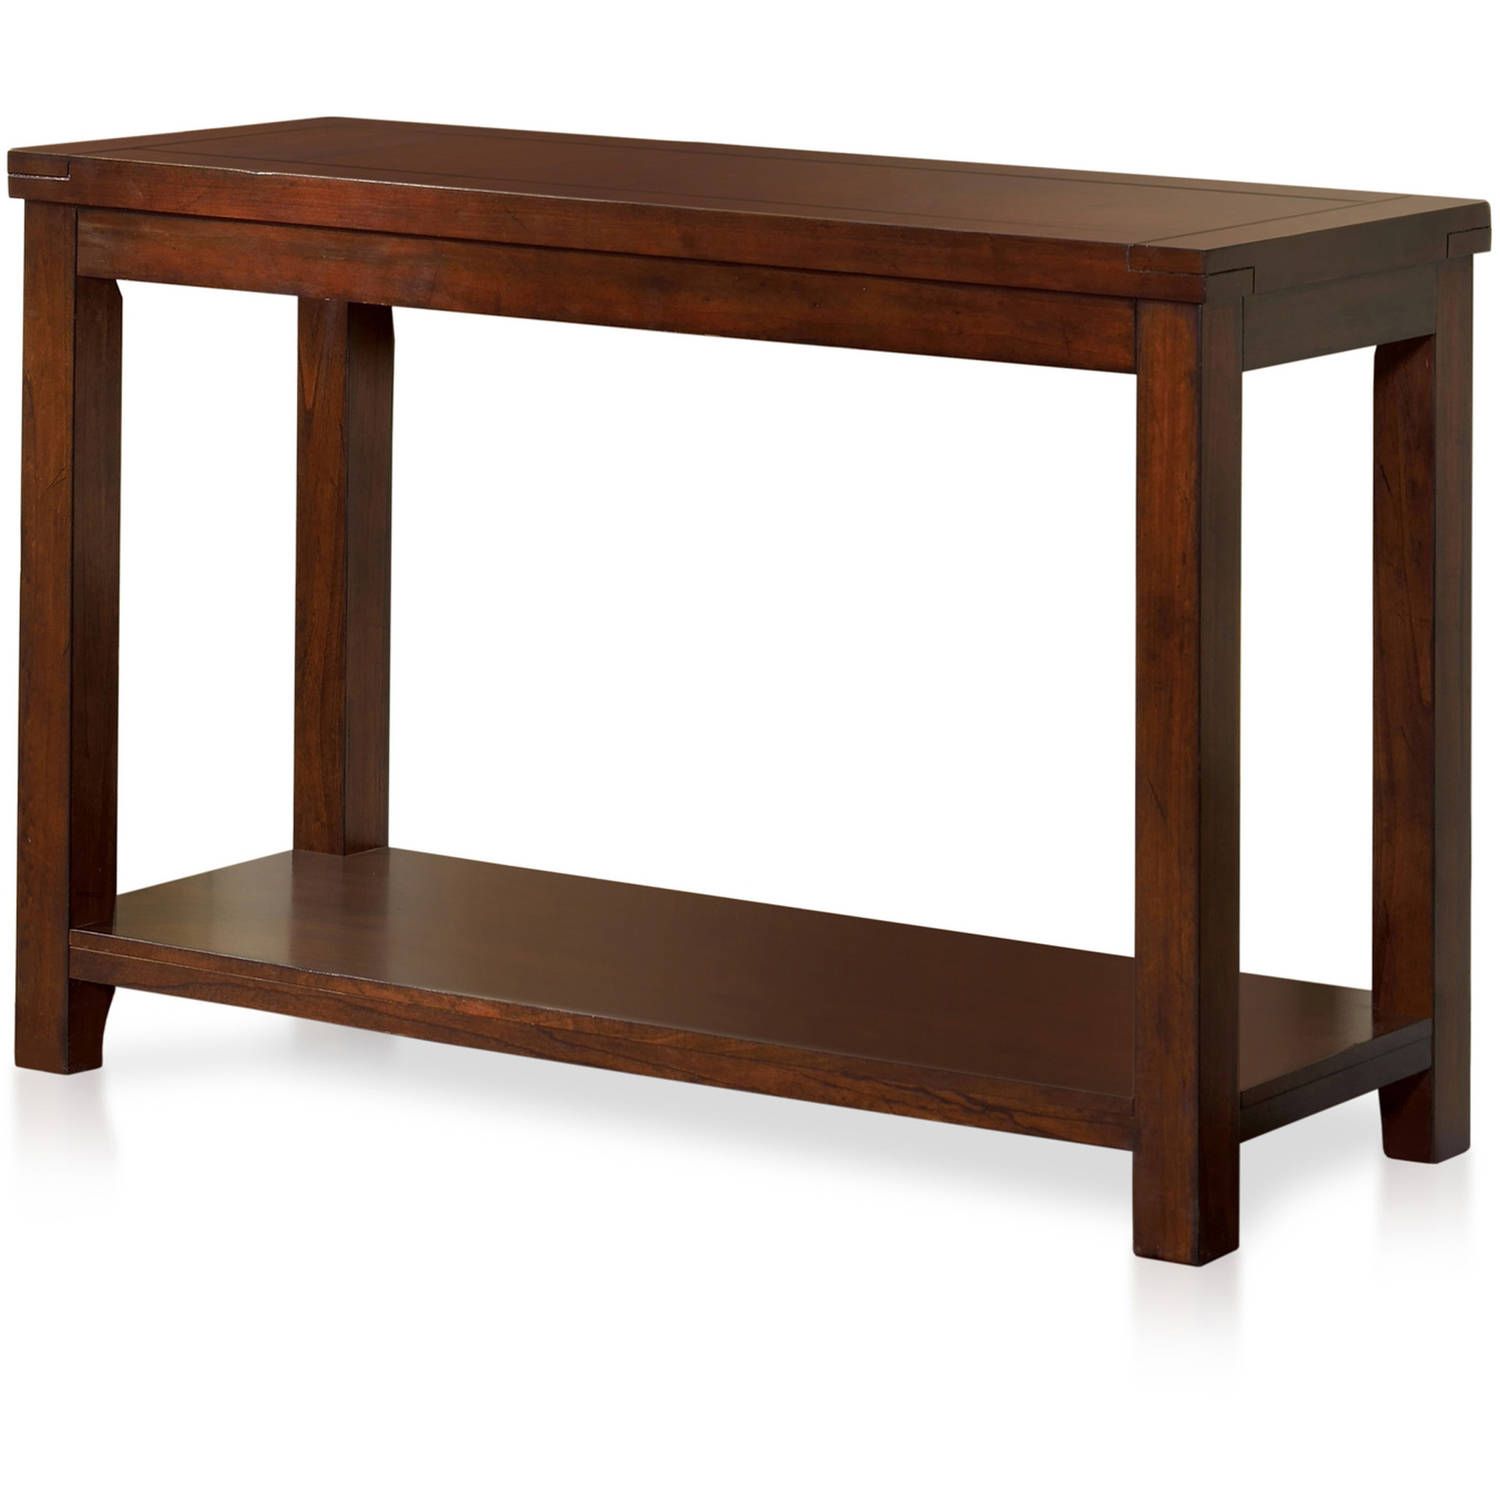 Furniture Of America Pivett Transitional Sofa Table, Dark Inside Heartwood Cherry Wood Console Tables (View 15 of 20)